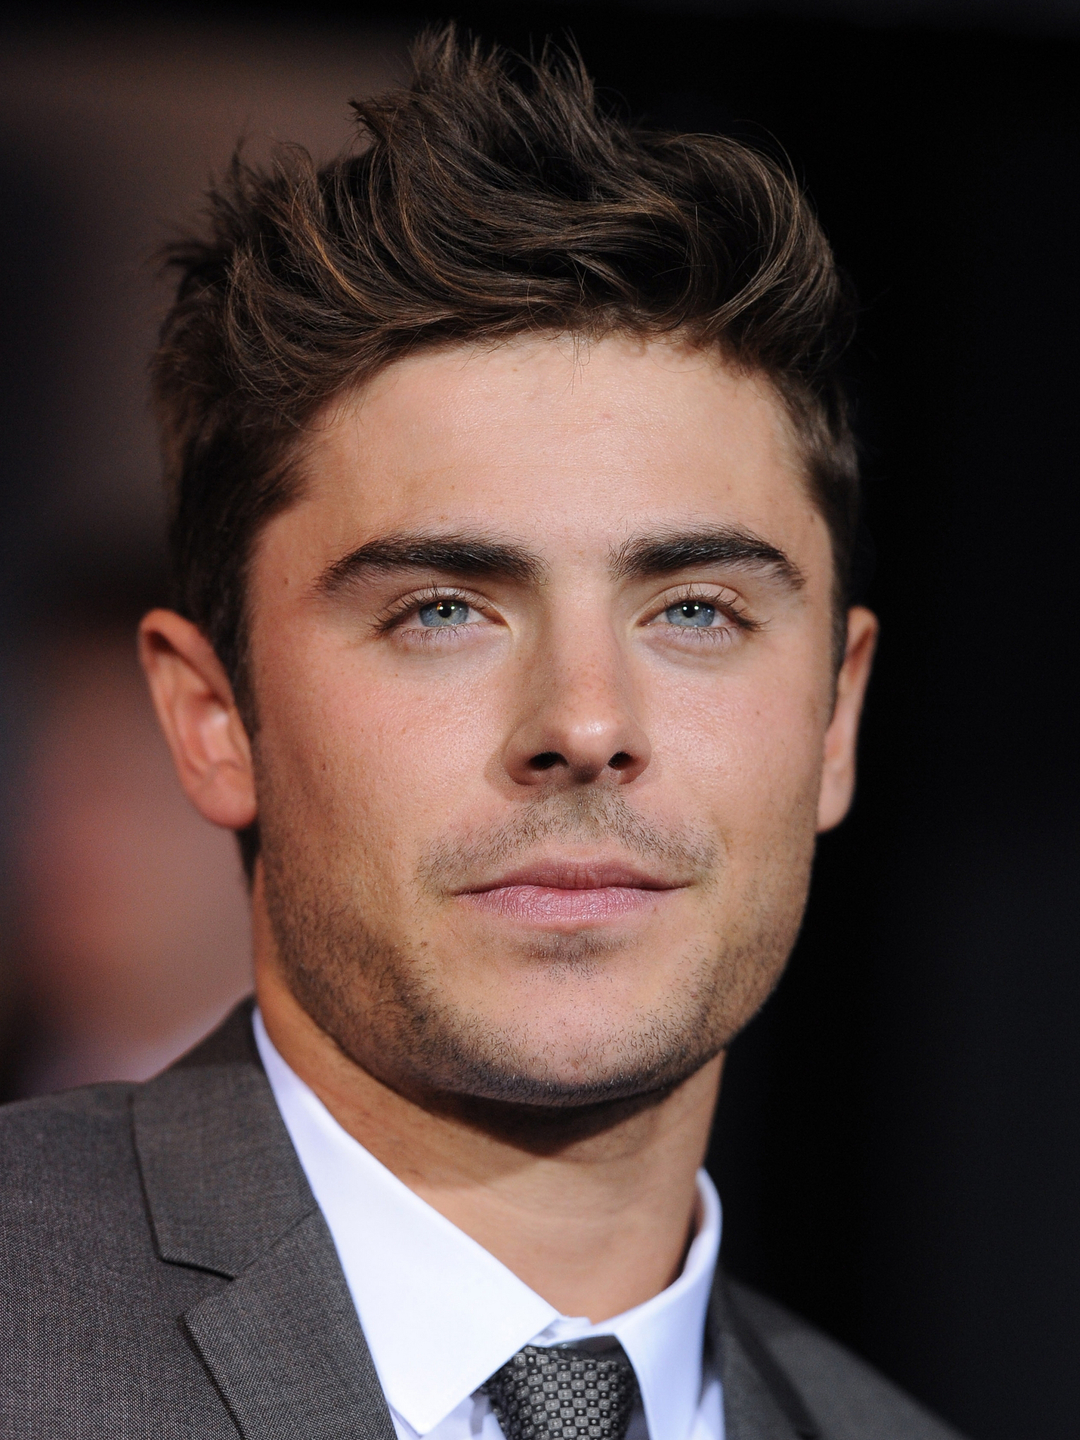 Zac Efron who is his father